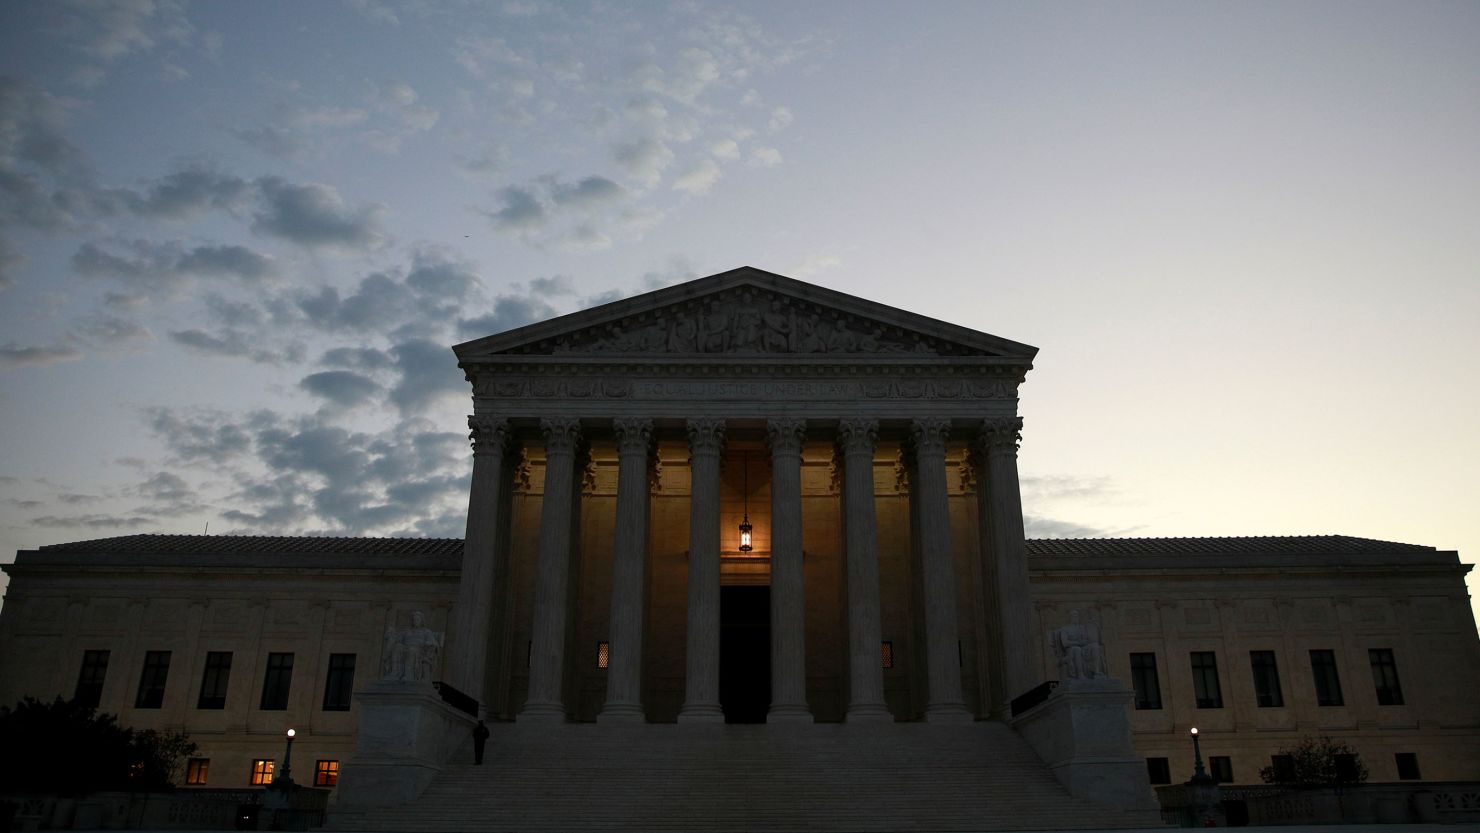 The exterior of the Supreme Court building in Washington, DC, November 30, 2018.